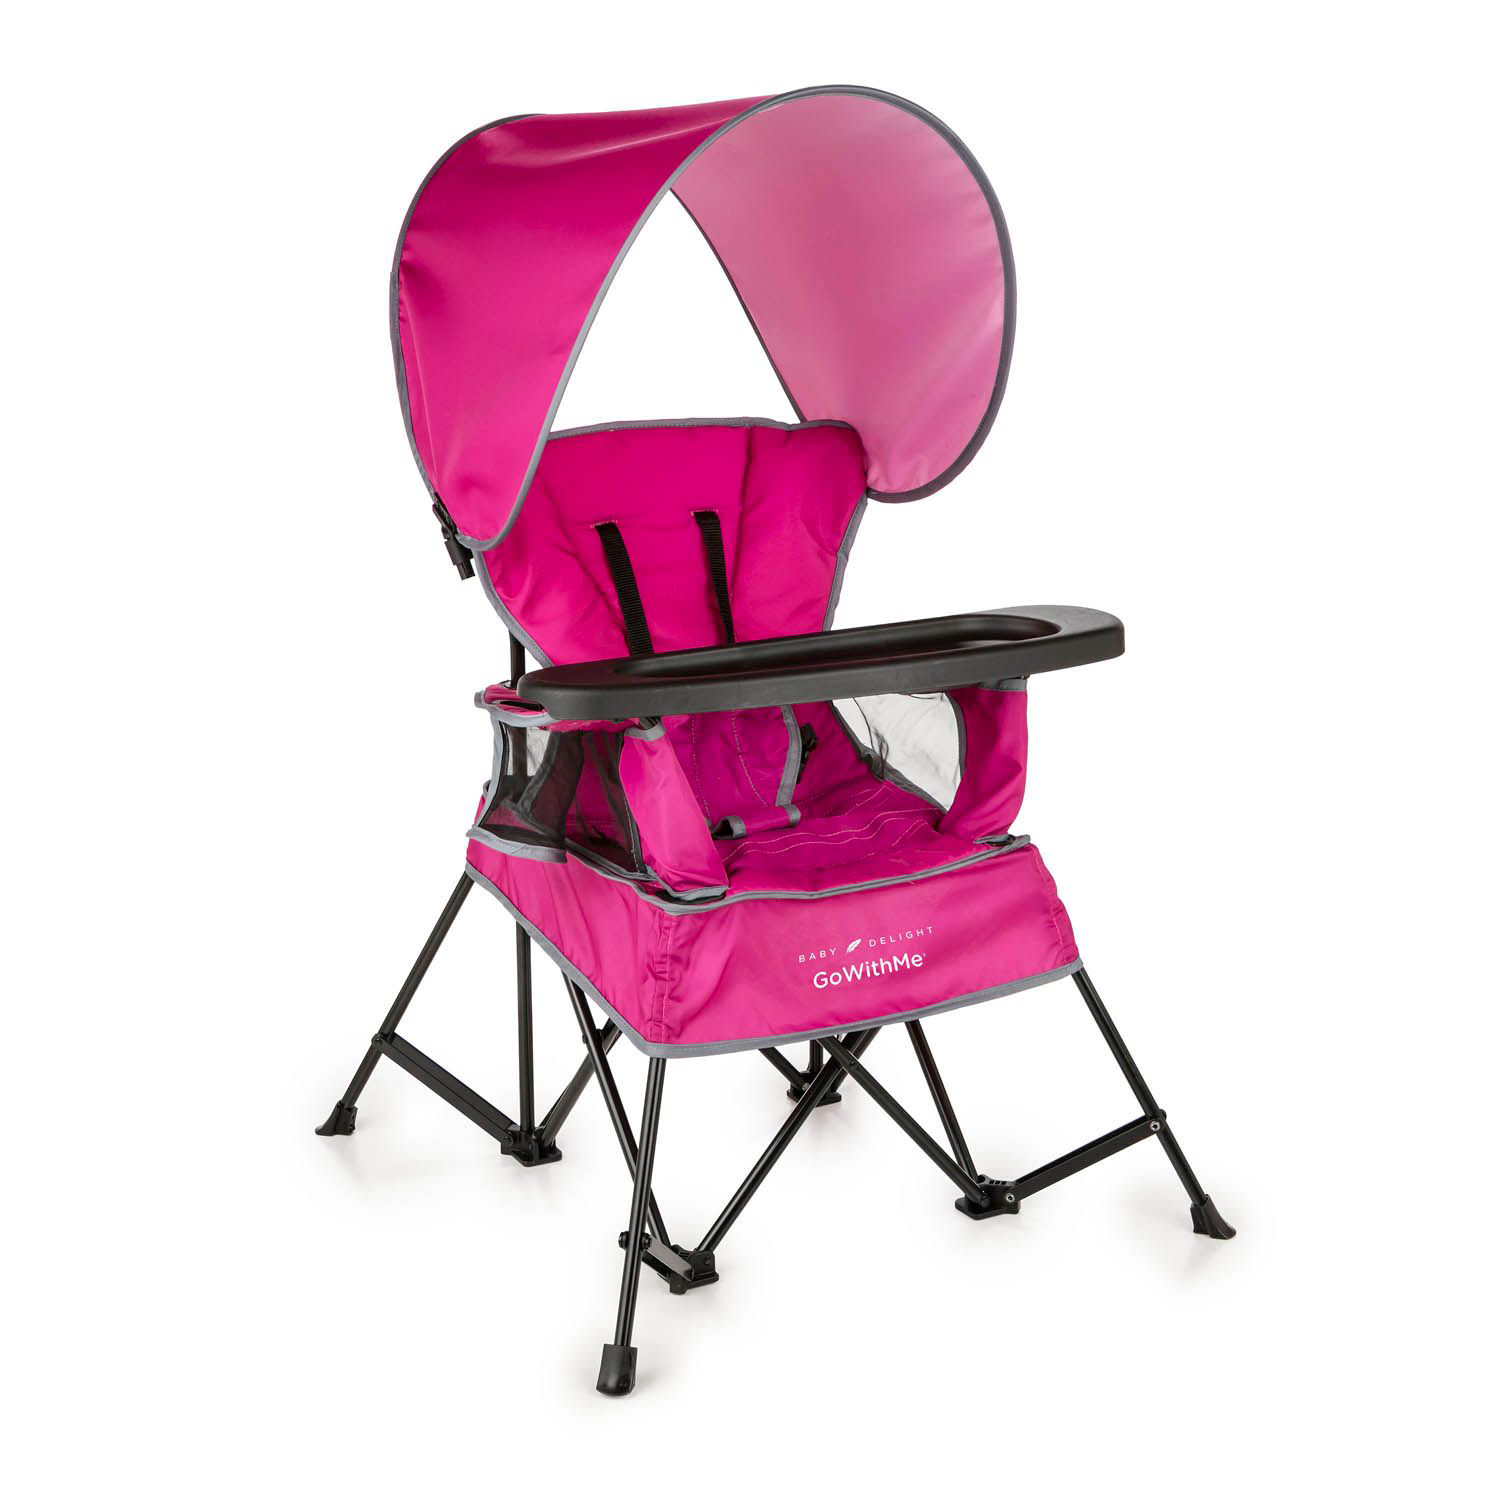 Baby Delight Go With Me Venture Deluxe Portable Chair for Kids - Pink